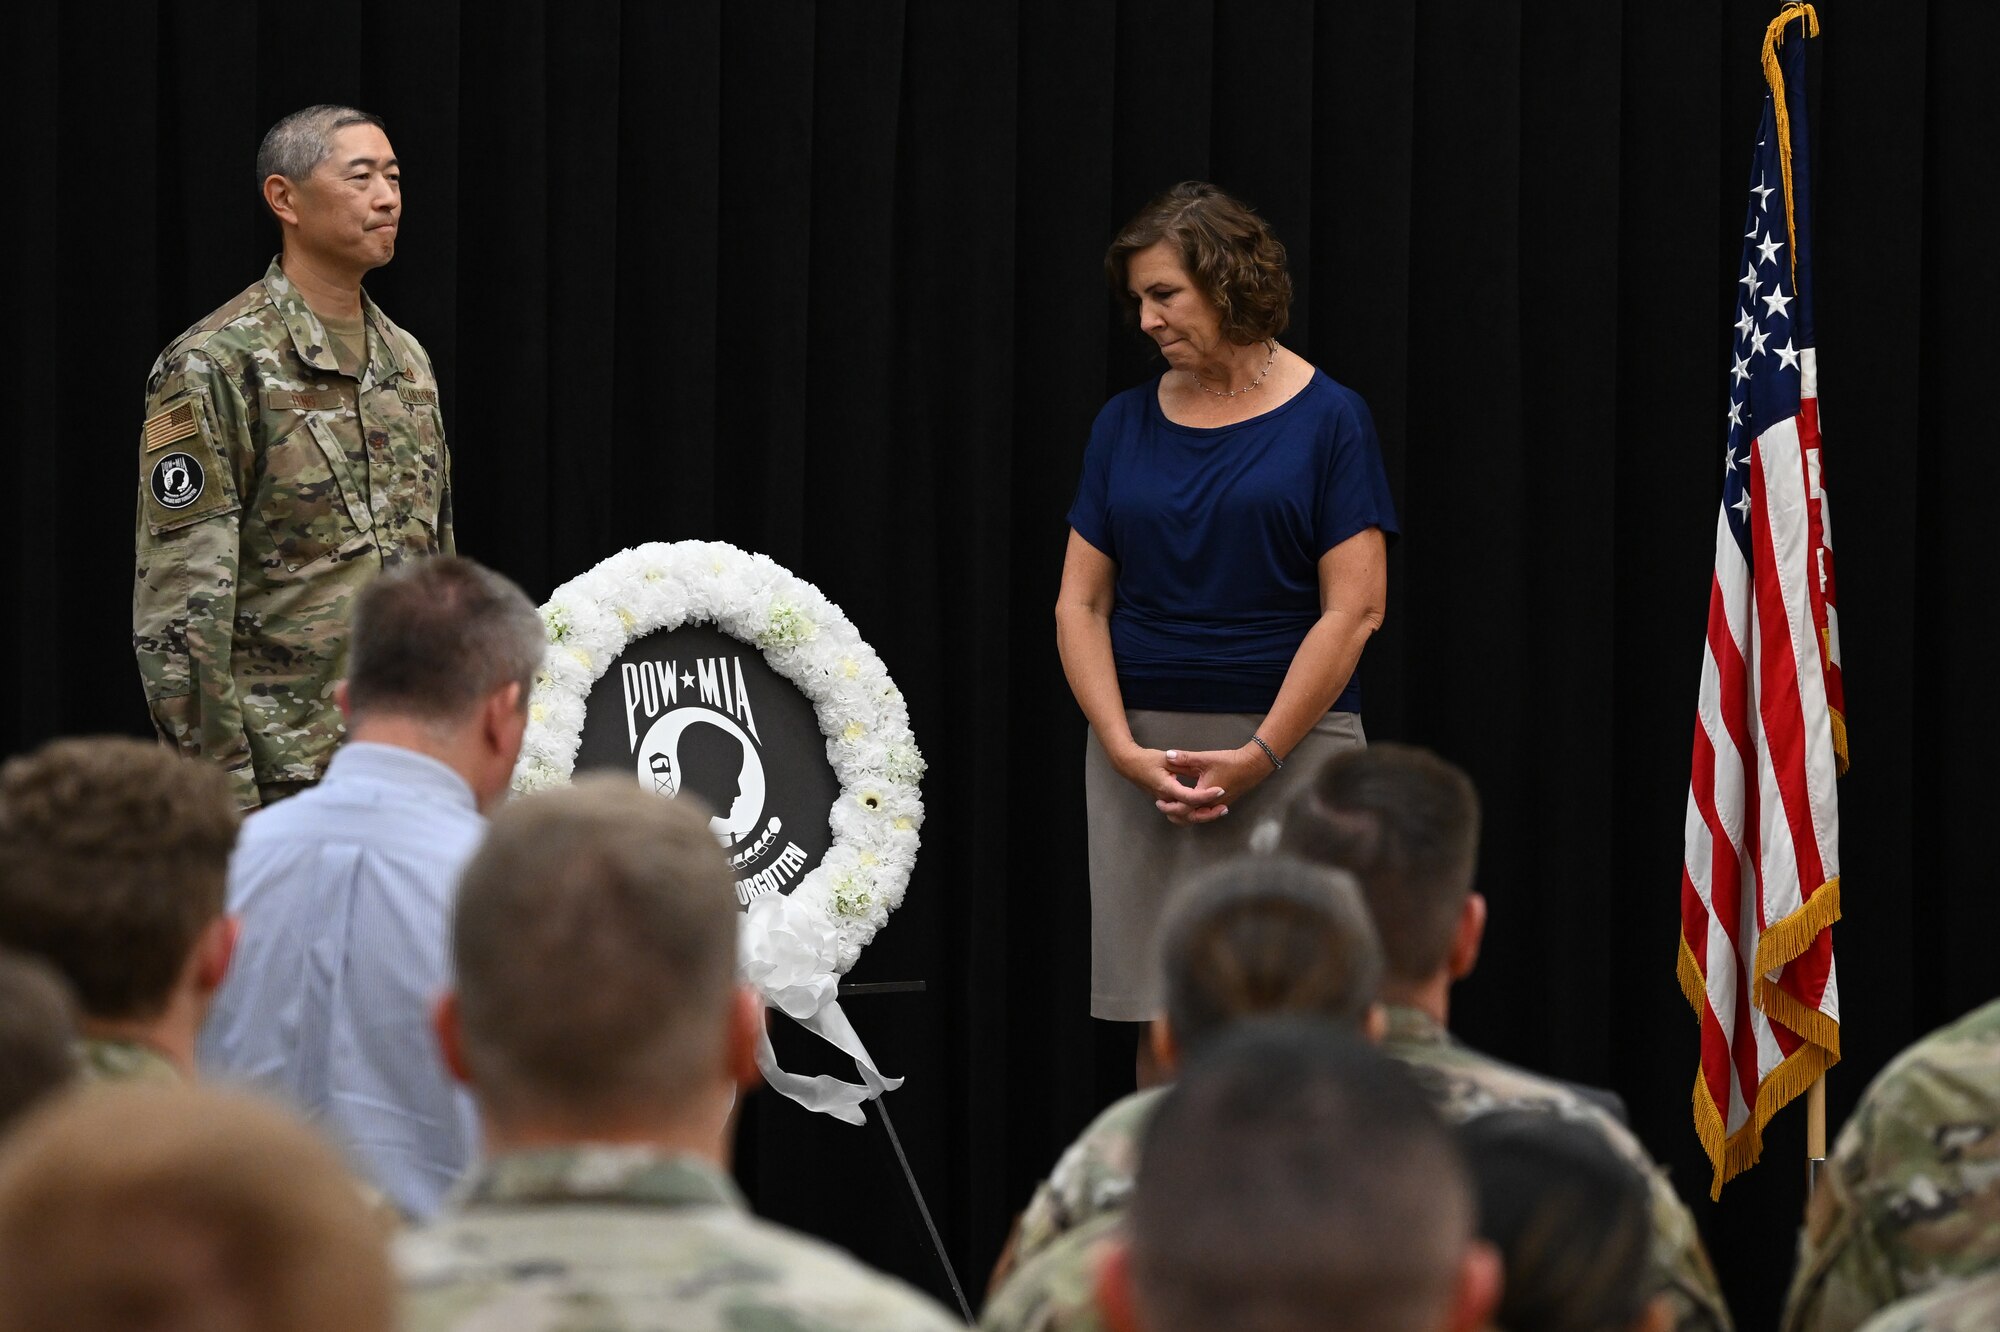 Col. Peter Feng, 75th Air Base Wing vice commander, and Stephanie Galley, League of POW/MIA Families, present a wreath during Team Hill's POW/MIA Remembrance Week closing ceremony at Hill Air Force Base, Utah, Sept. 16, 2022.